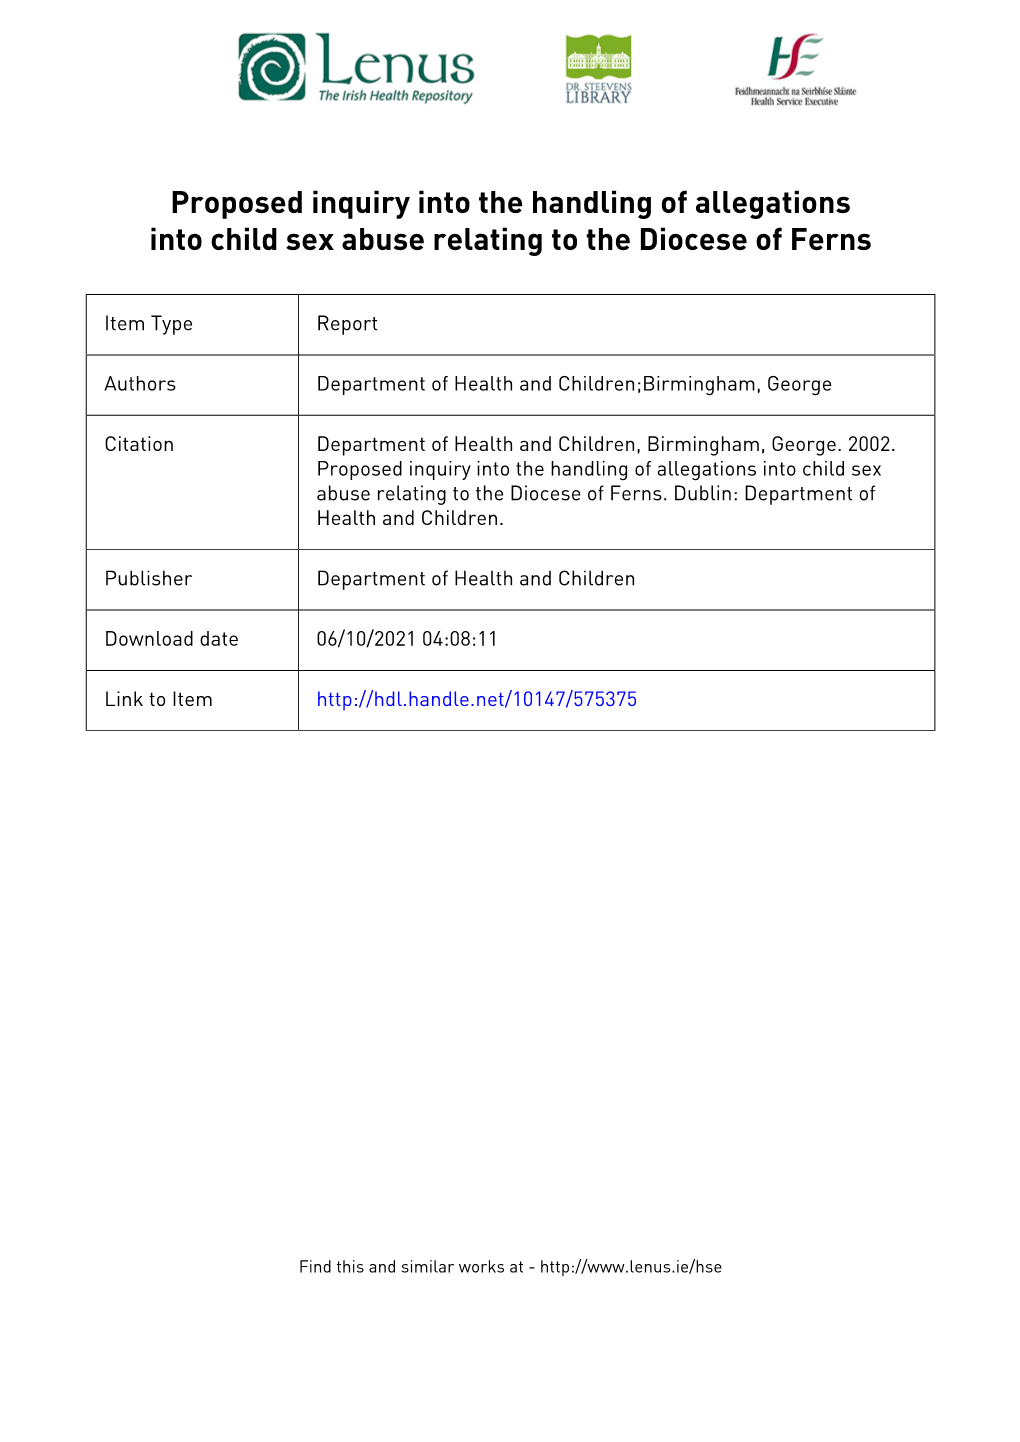 Proposed Inquiry Into the Handling of Allegations of Child Sex Abuse Relating to the Diocese of Ferns